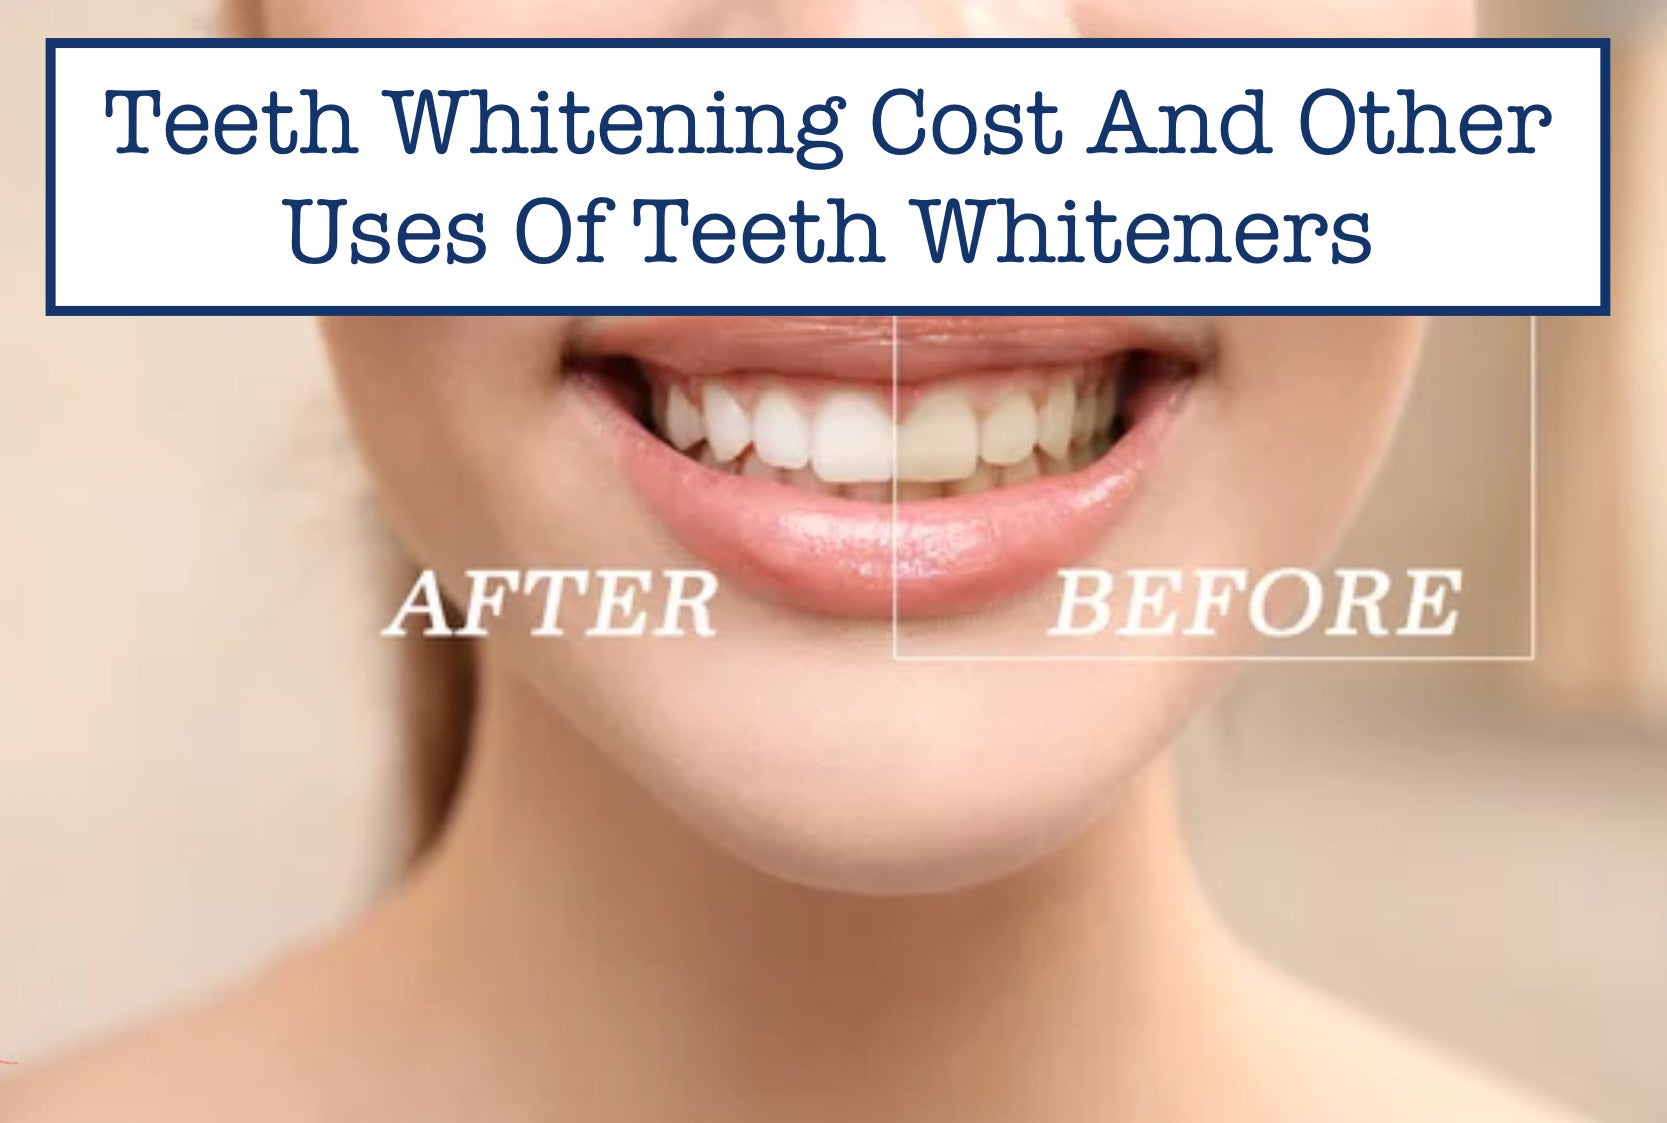 Teeth Whitening Cost And Other Uses Of Teeth Whiteners